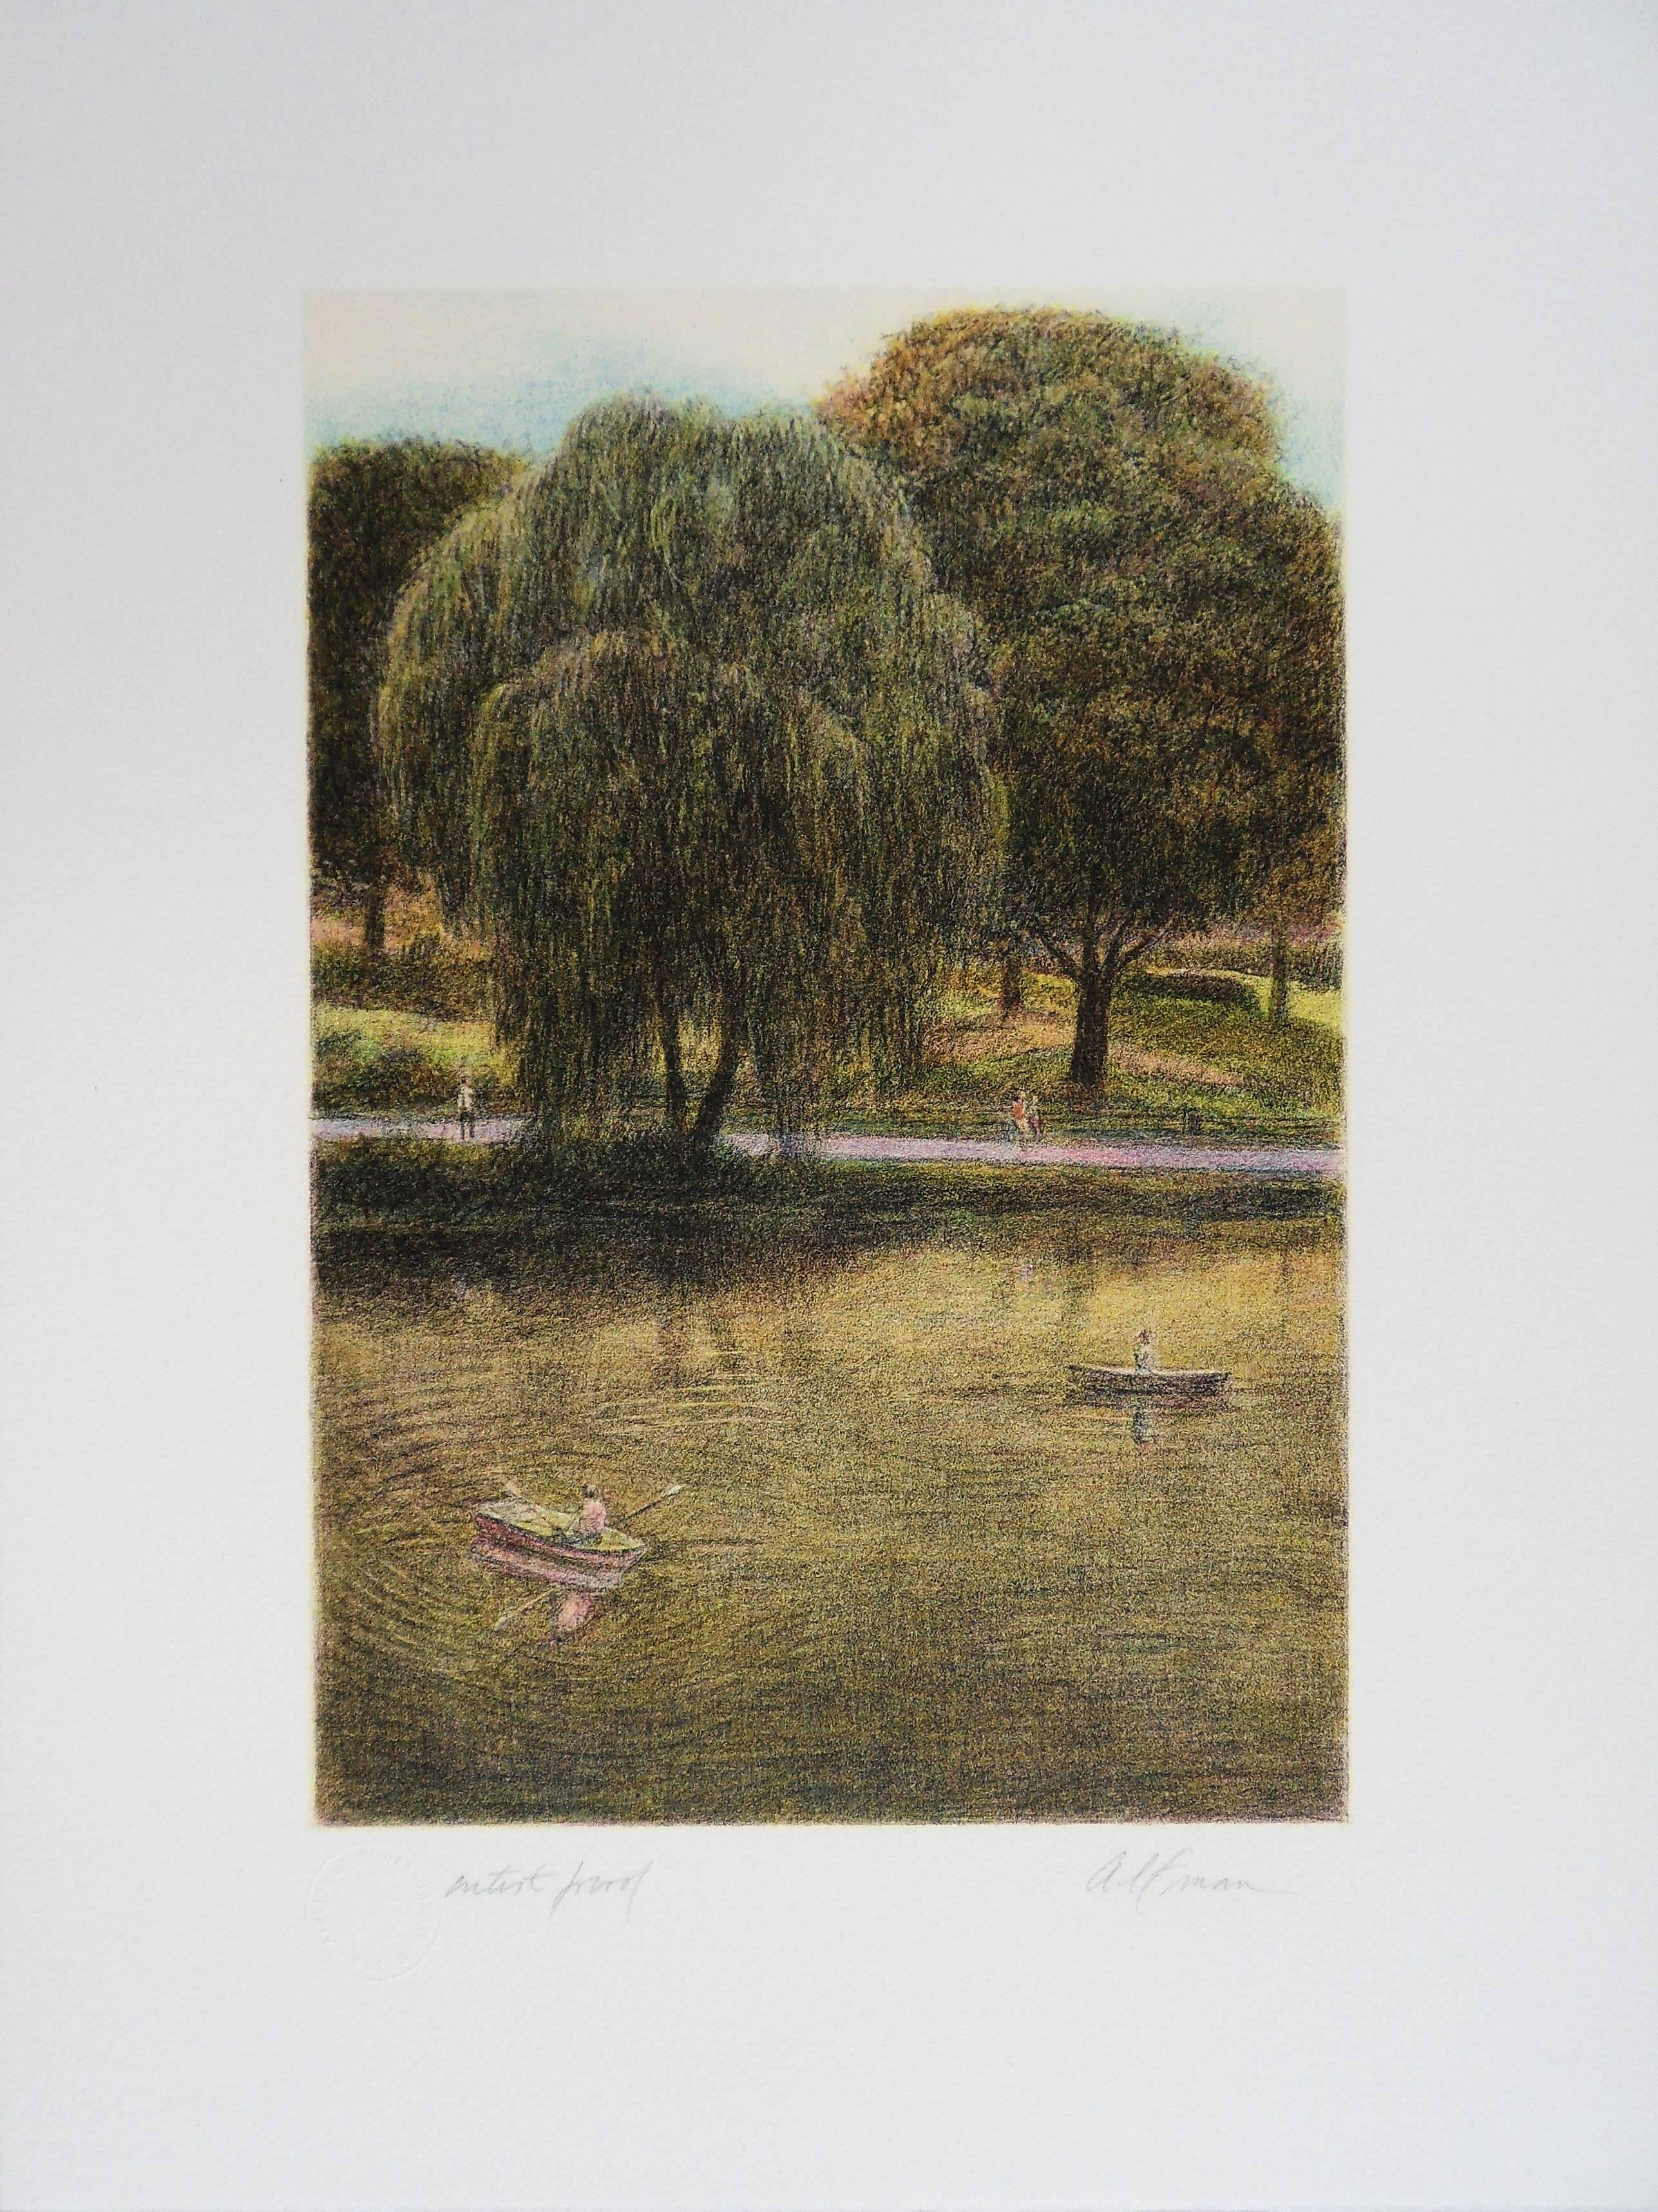 Harold Altman Figurative Print - New York : The Lake in Central Park - Original handsigned lithograph